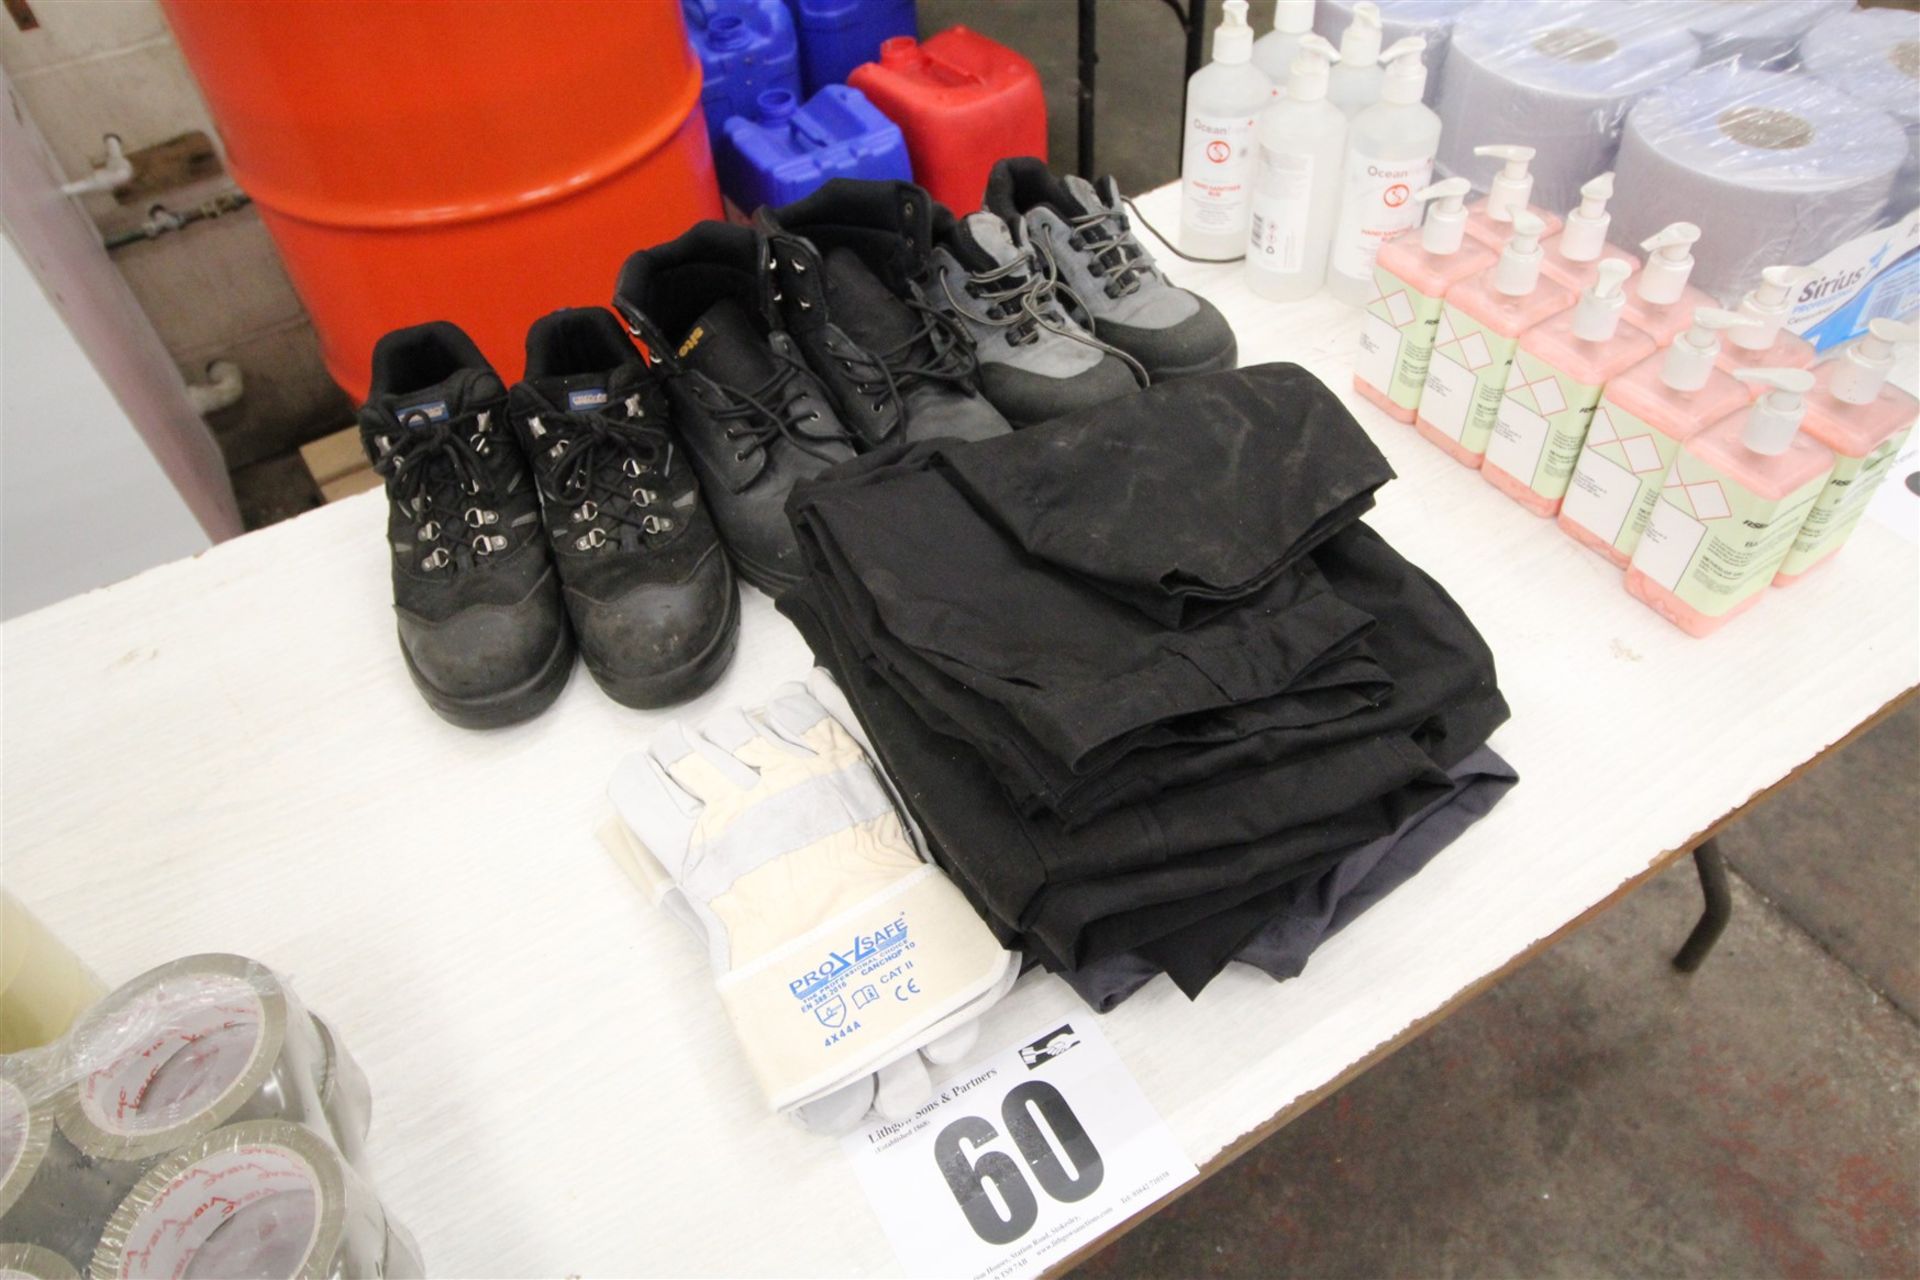 Contents on Middle of Table of 3x Pairs of Safety Boots, 4x Pairs of Trousers, and 3x Pairs of